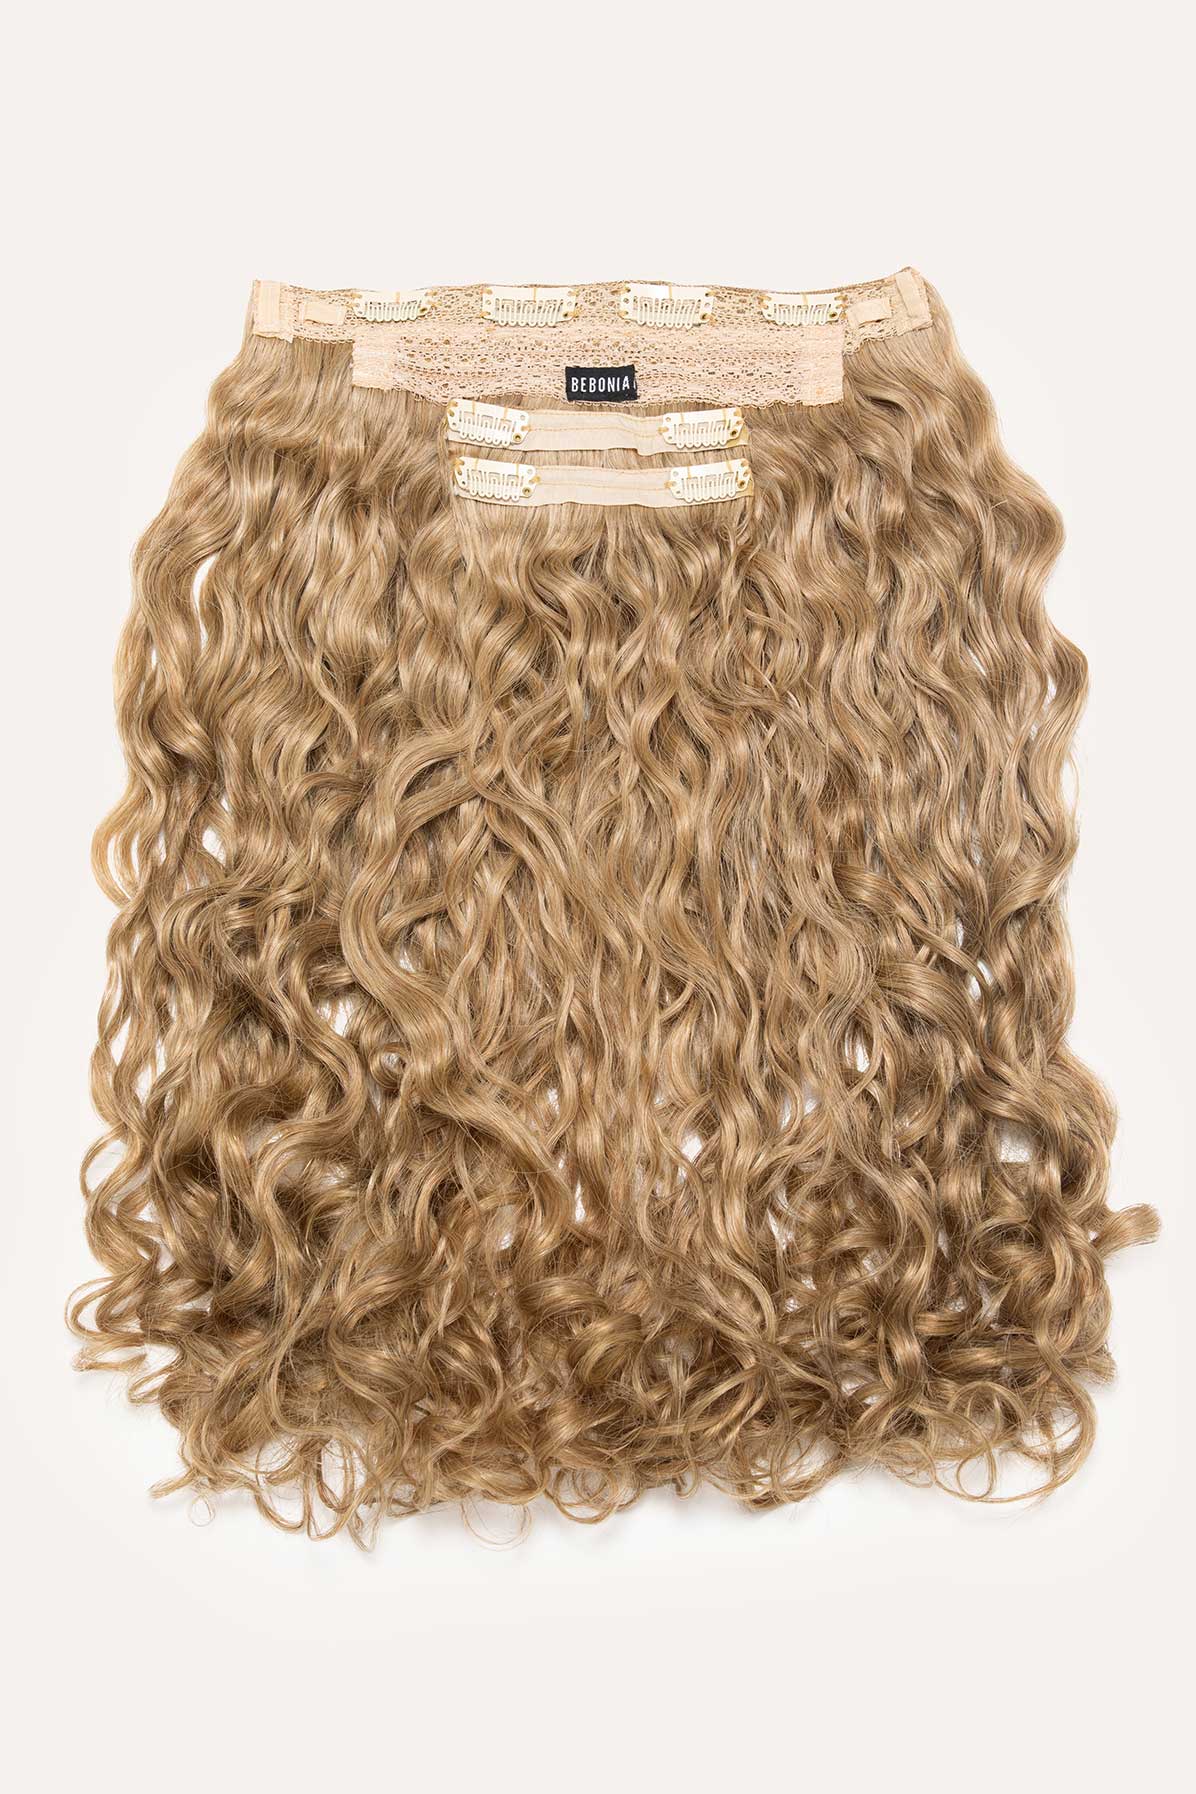 Ash Blonde Curly Slip-On Hair Extensions 180G 22”